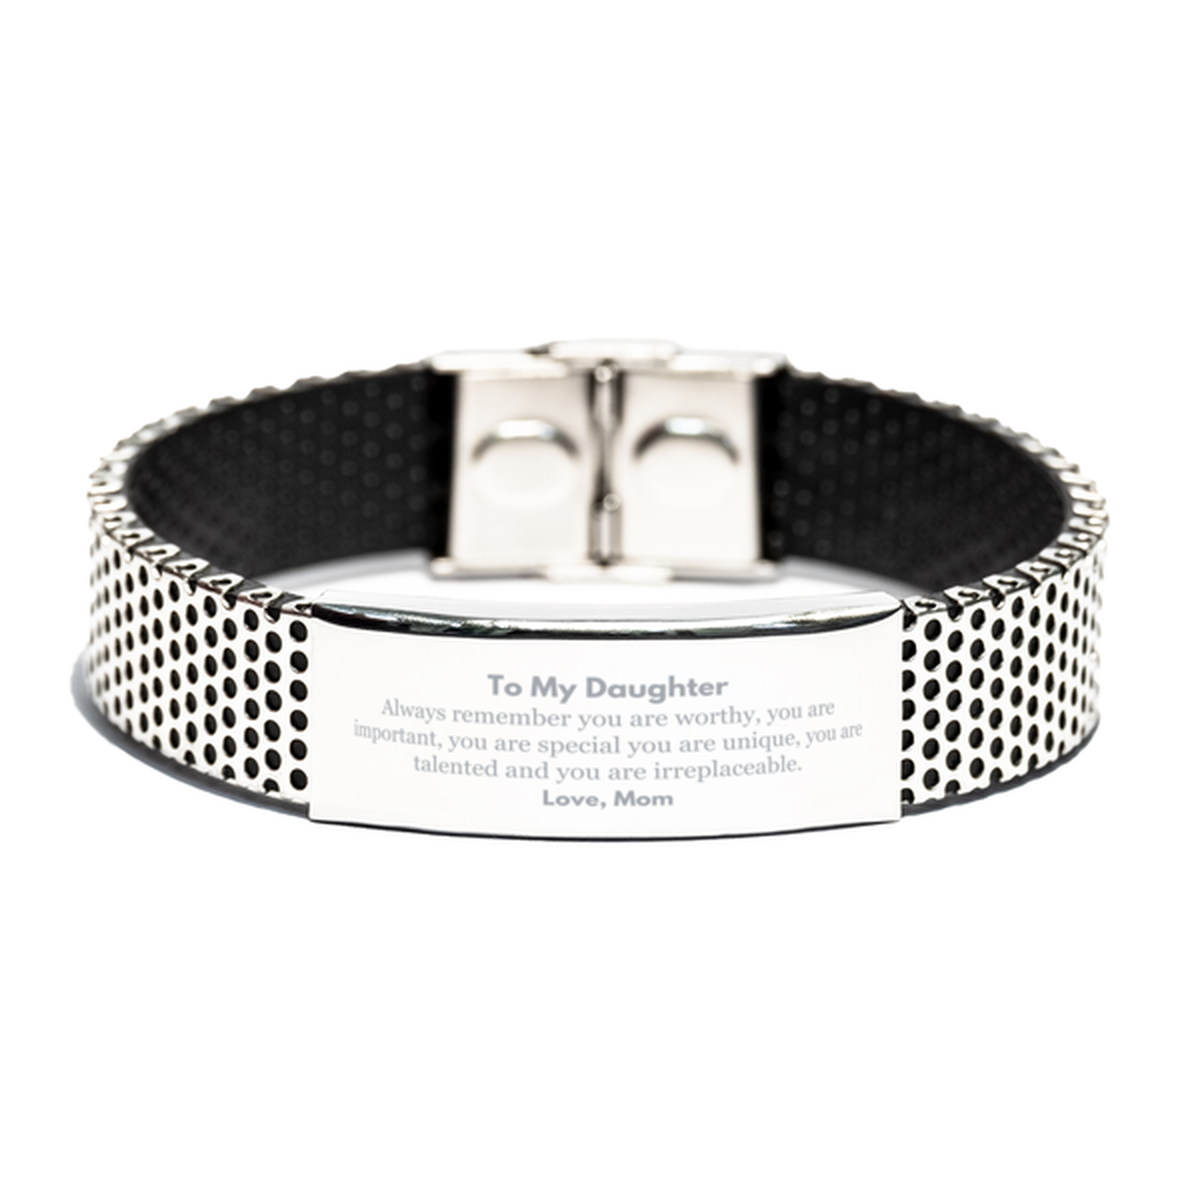 Daughter Birthday Gifts from Mom, Inspirational Stainless Steel Bracelet for Daughter Christmas Graduation Gifts for Daughter Always remember you are worthy, you are important. Love, Mom